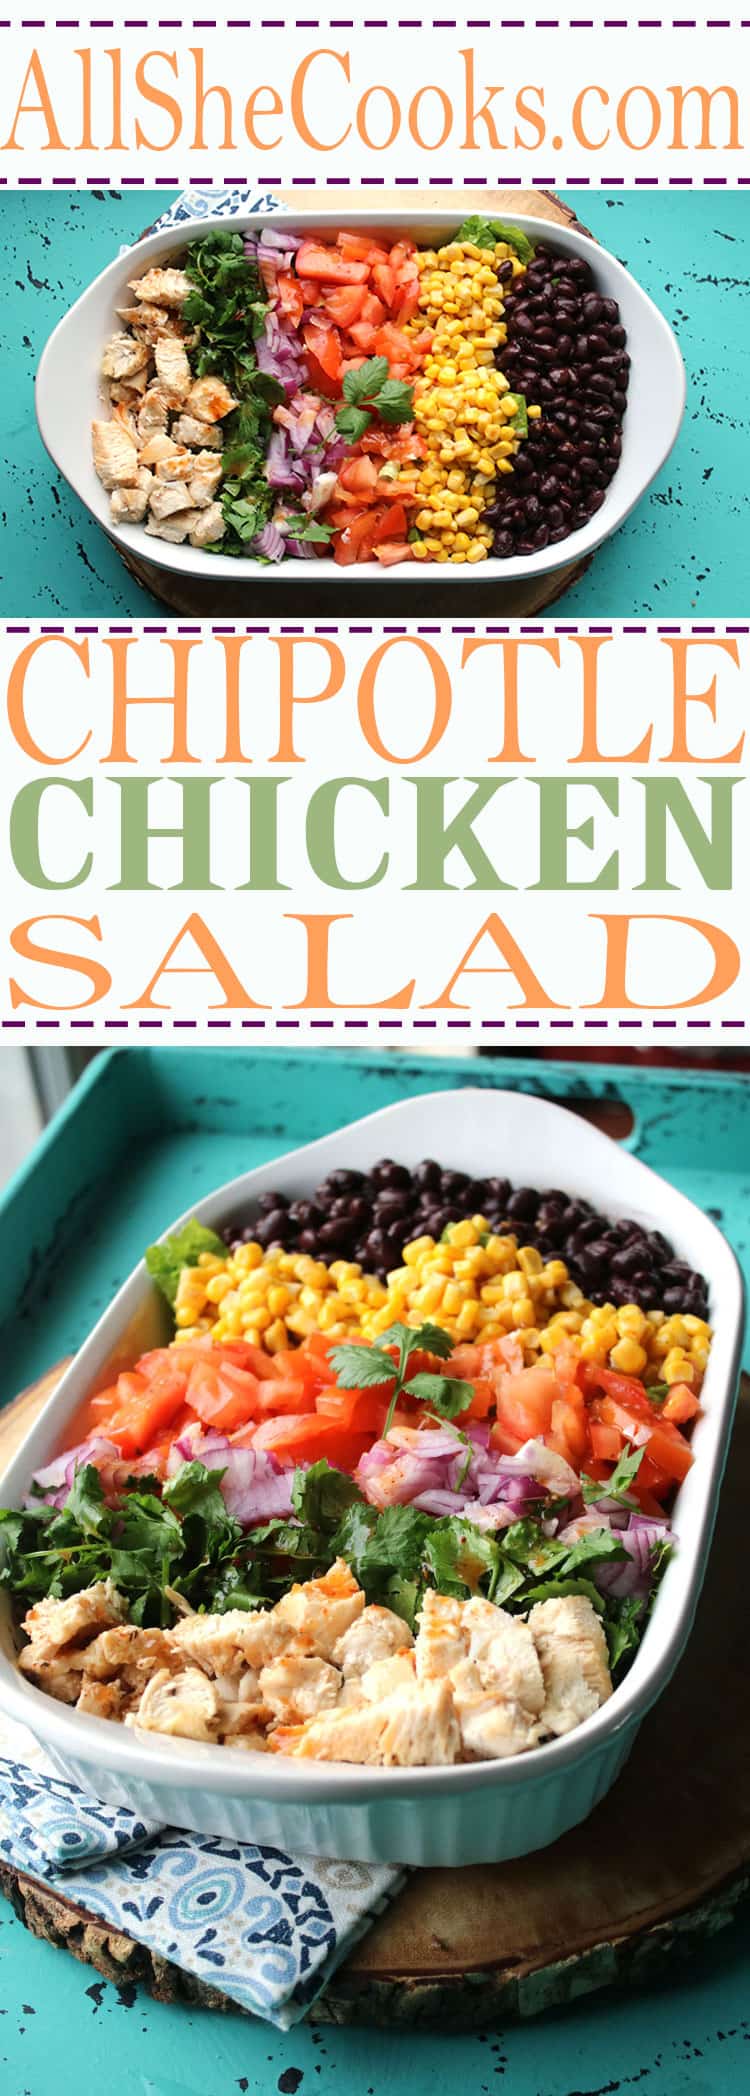 Grilled Chicken Chipotle Salad is an easy chopped salad that is full of flavor and protein and a great salad to serve for dinner or to make for lunch. This salad is filling and flavorful.